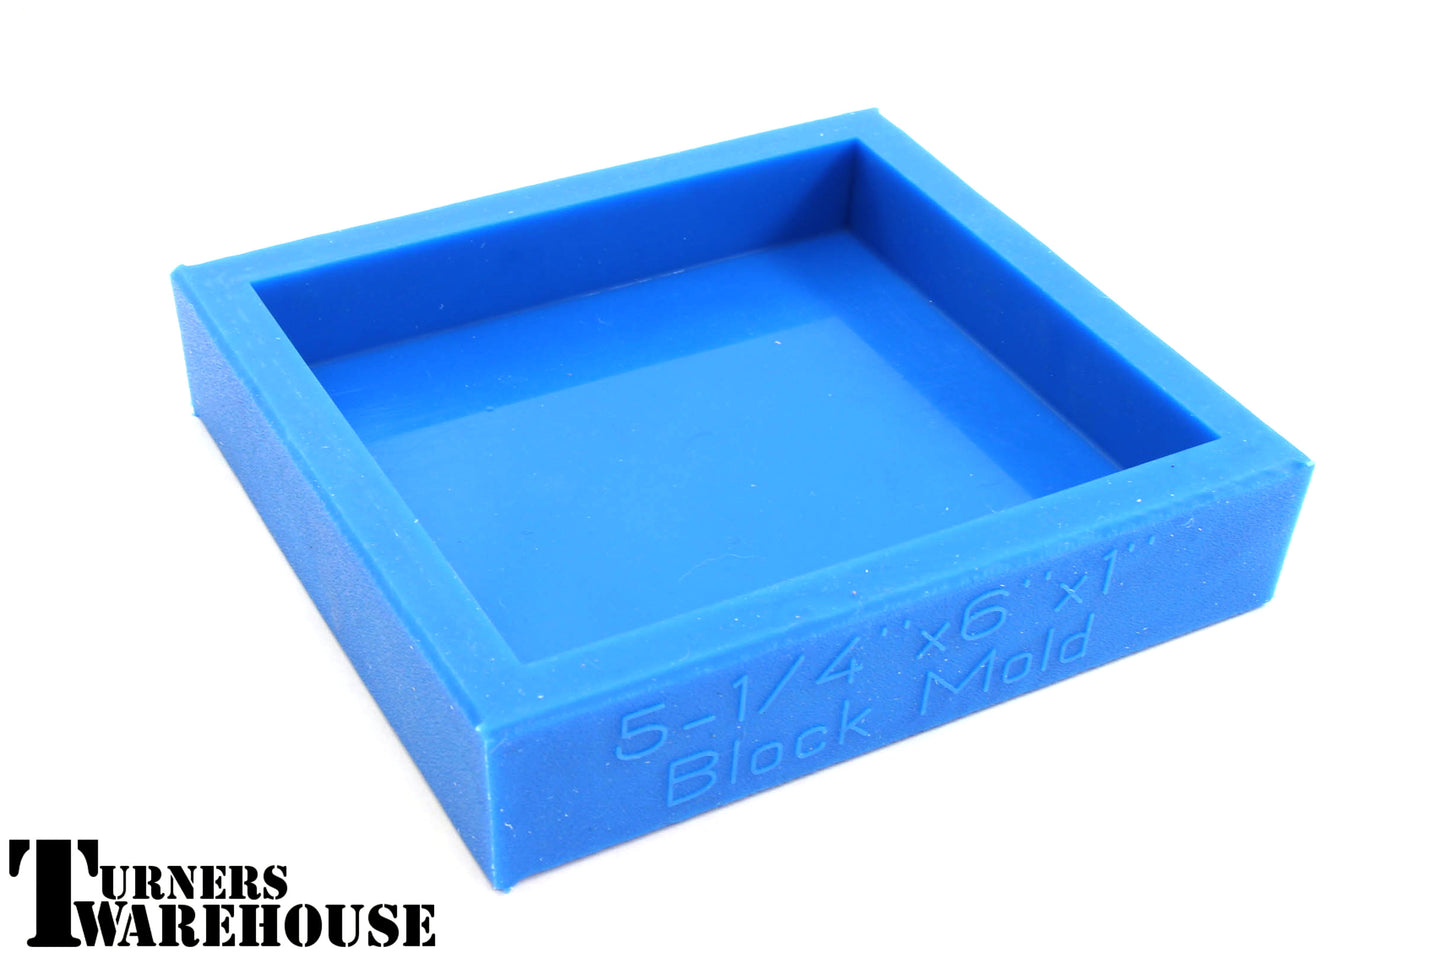 6x6x3 Deep Square Silicone Mold – Eye Candy Pigments